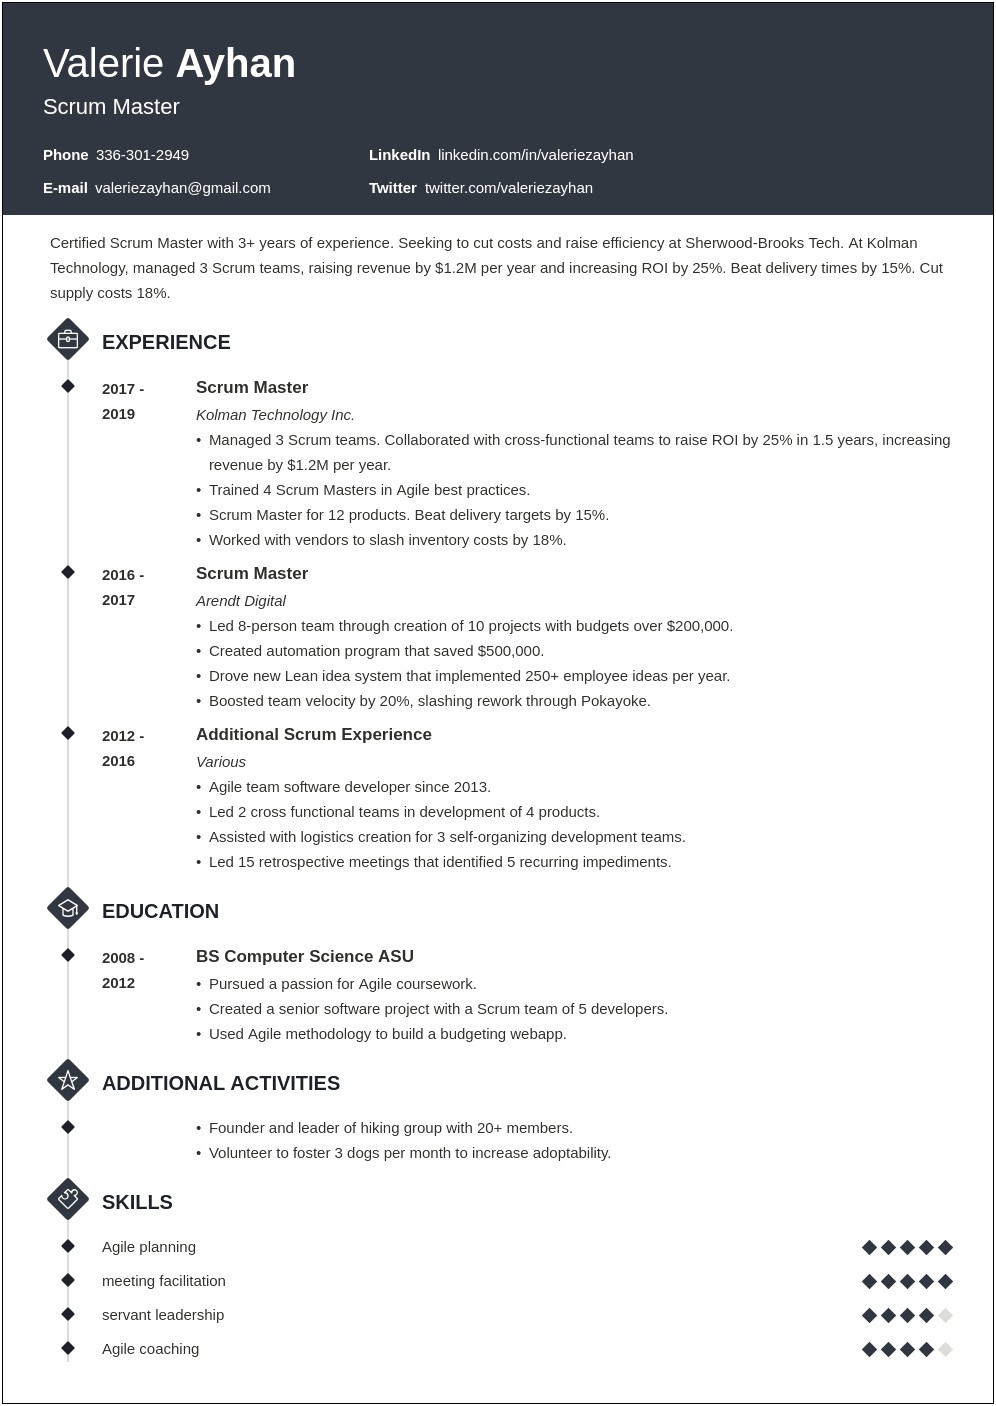 Scrum Master Experience Resume Chronological Order Or Relevance